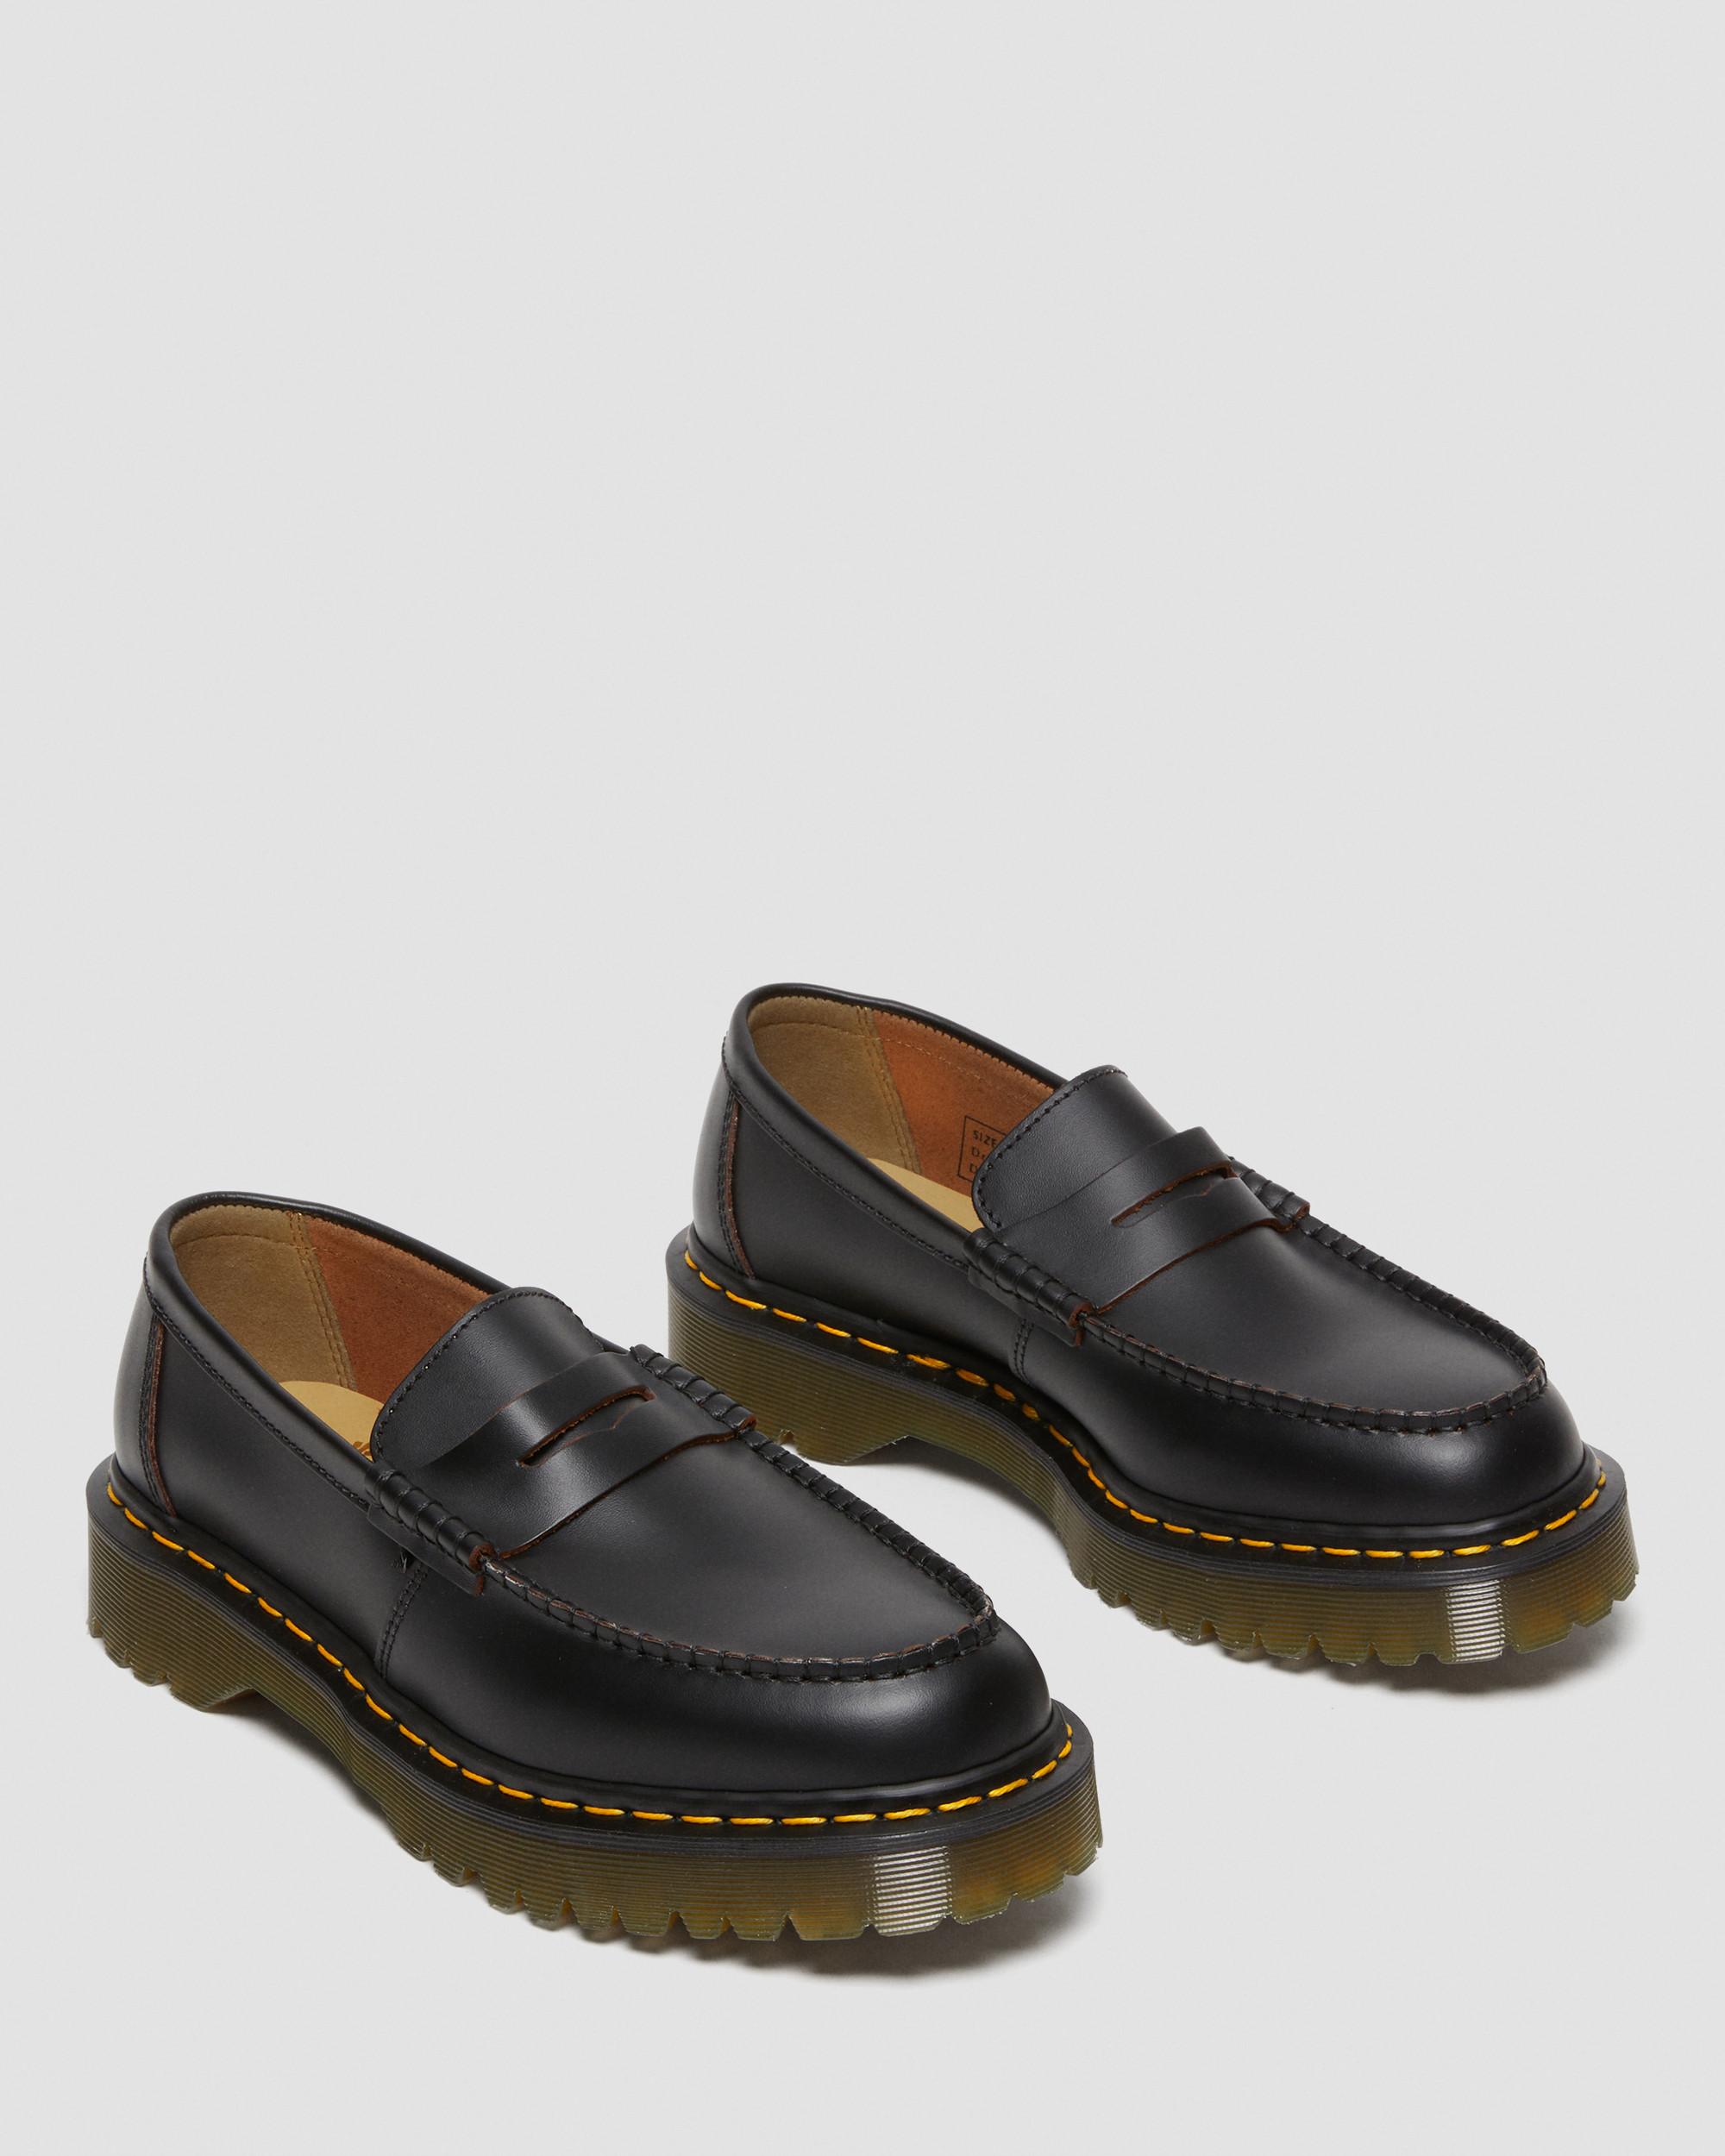 DR MARTENS Penton Bex Made in England Quilon Leather Loafers